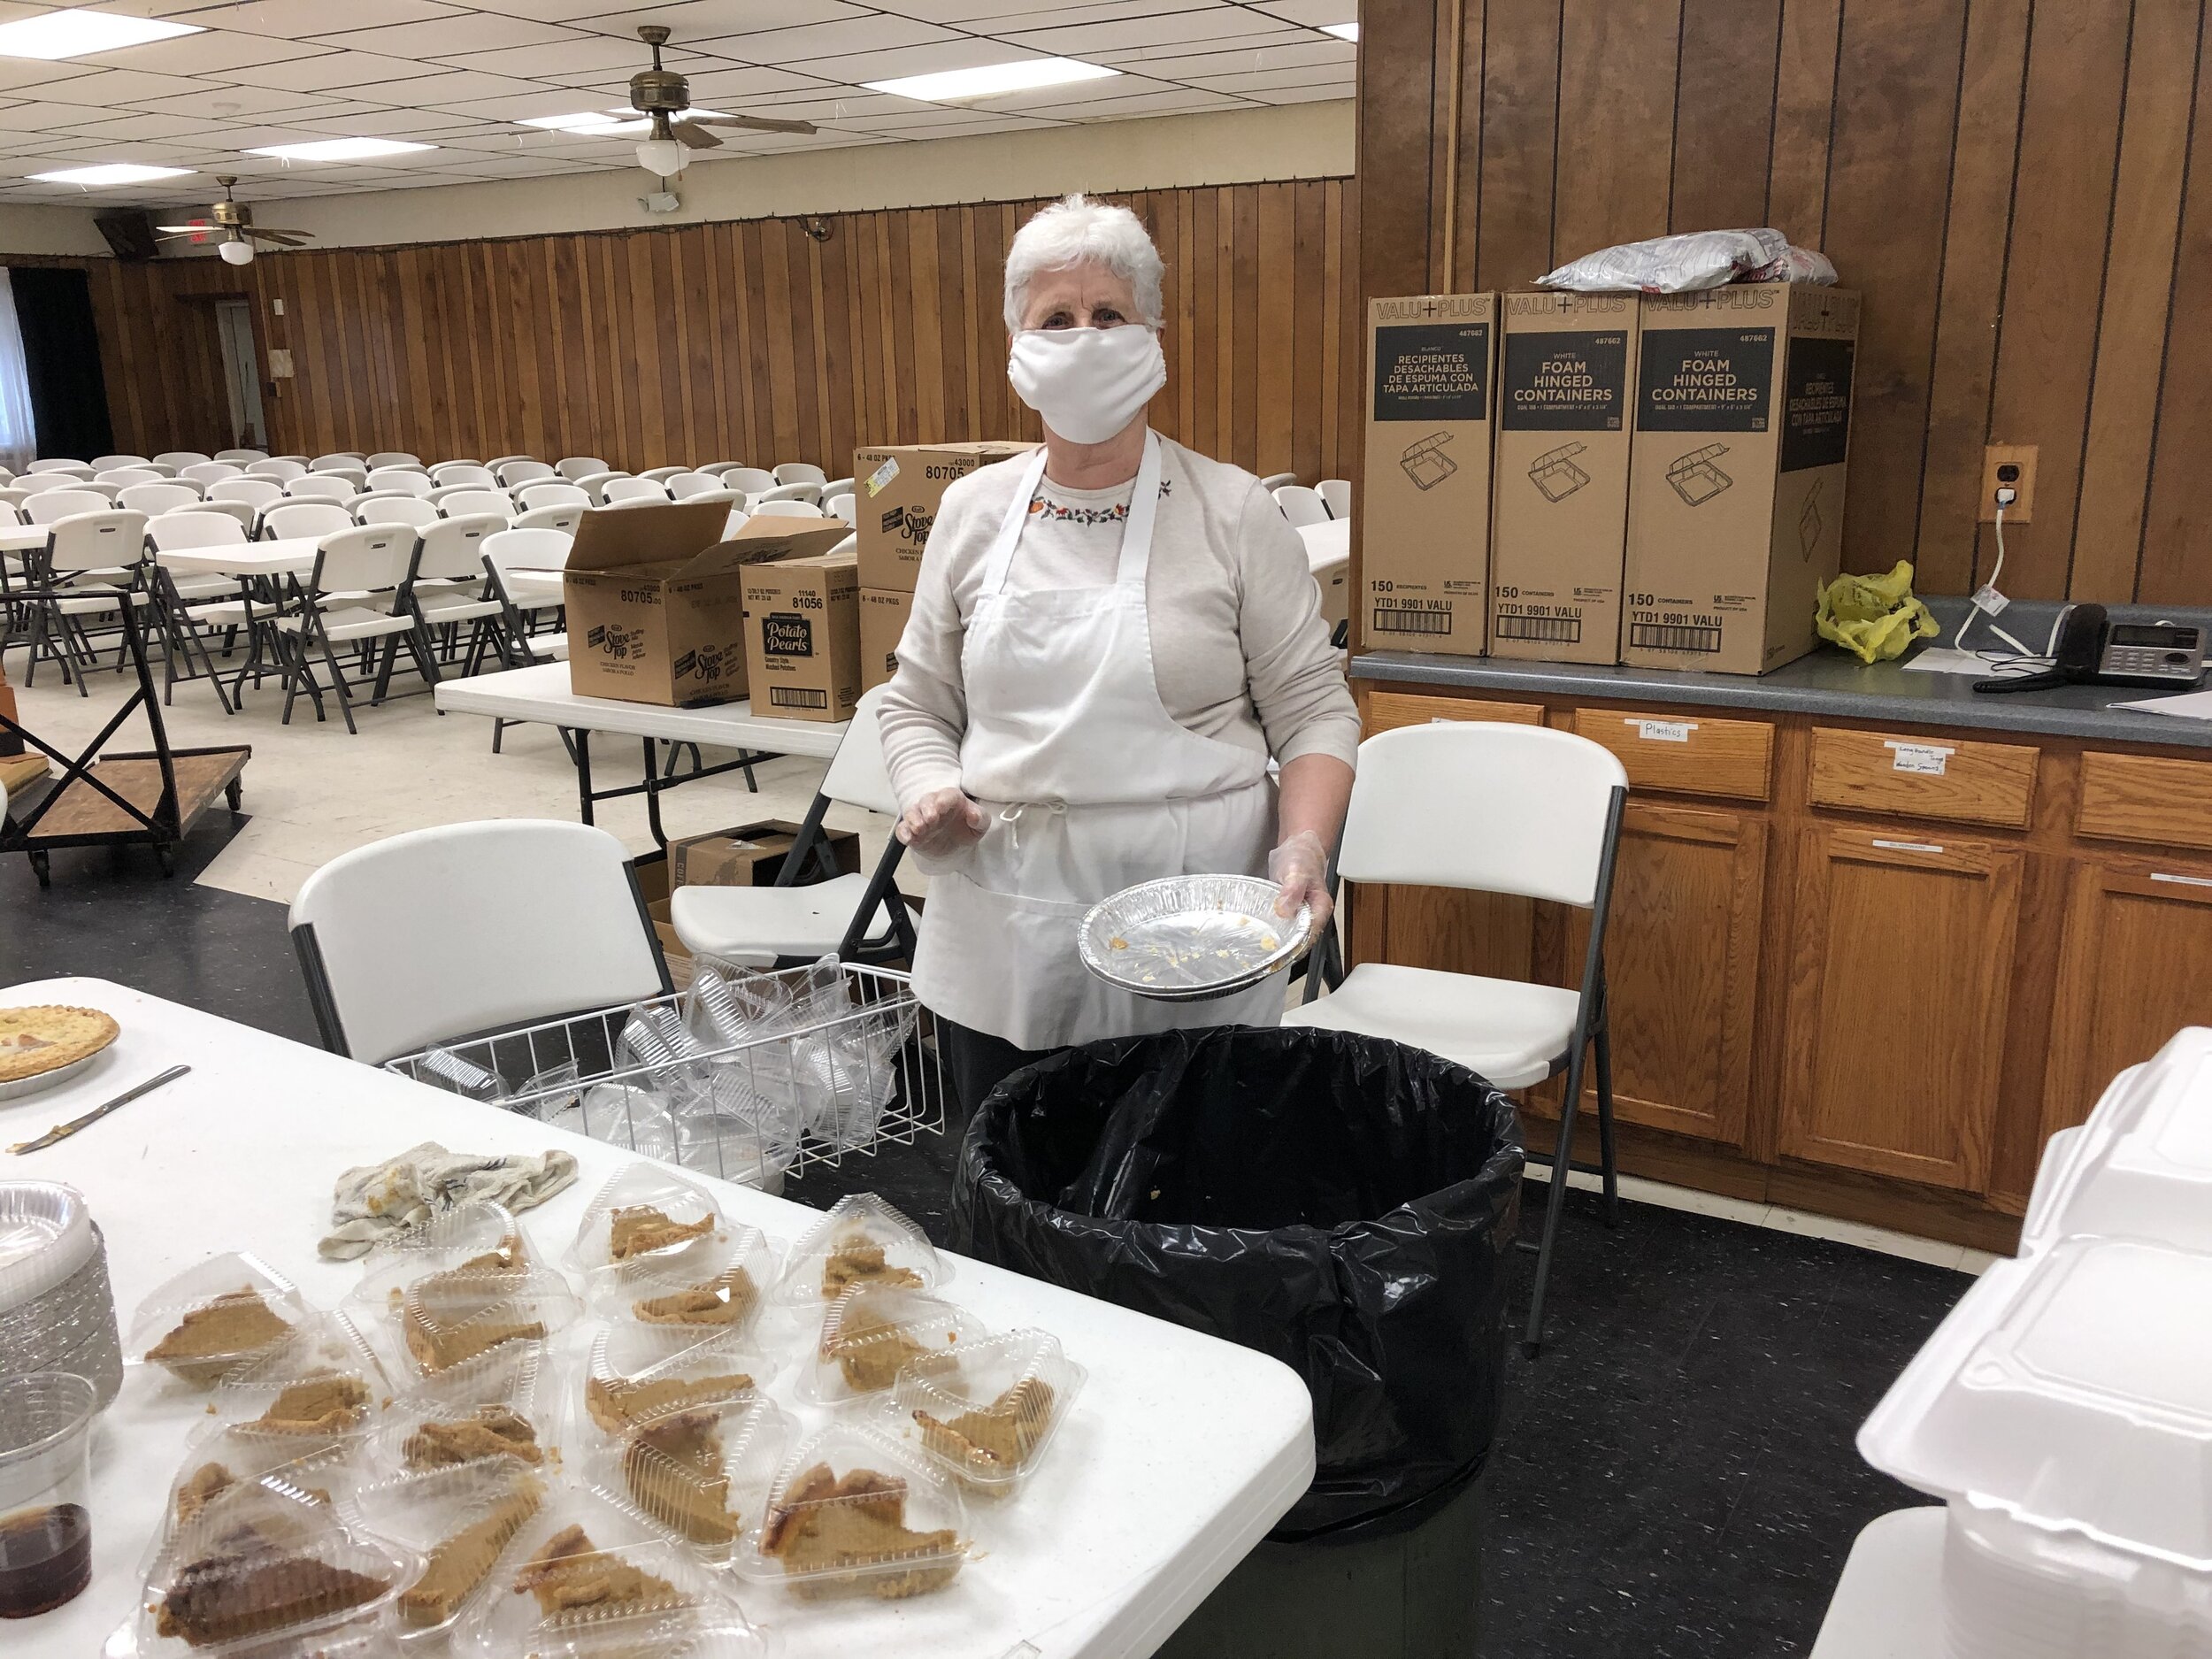    Sunset Avenue's Carol Peets, a member of the Fortier clan that is the backbone of the annual community Thanksgiving dinner here, was busy just prior to meal time Thursday slicing pumpkin pies and placing the slices in individual plastic containers